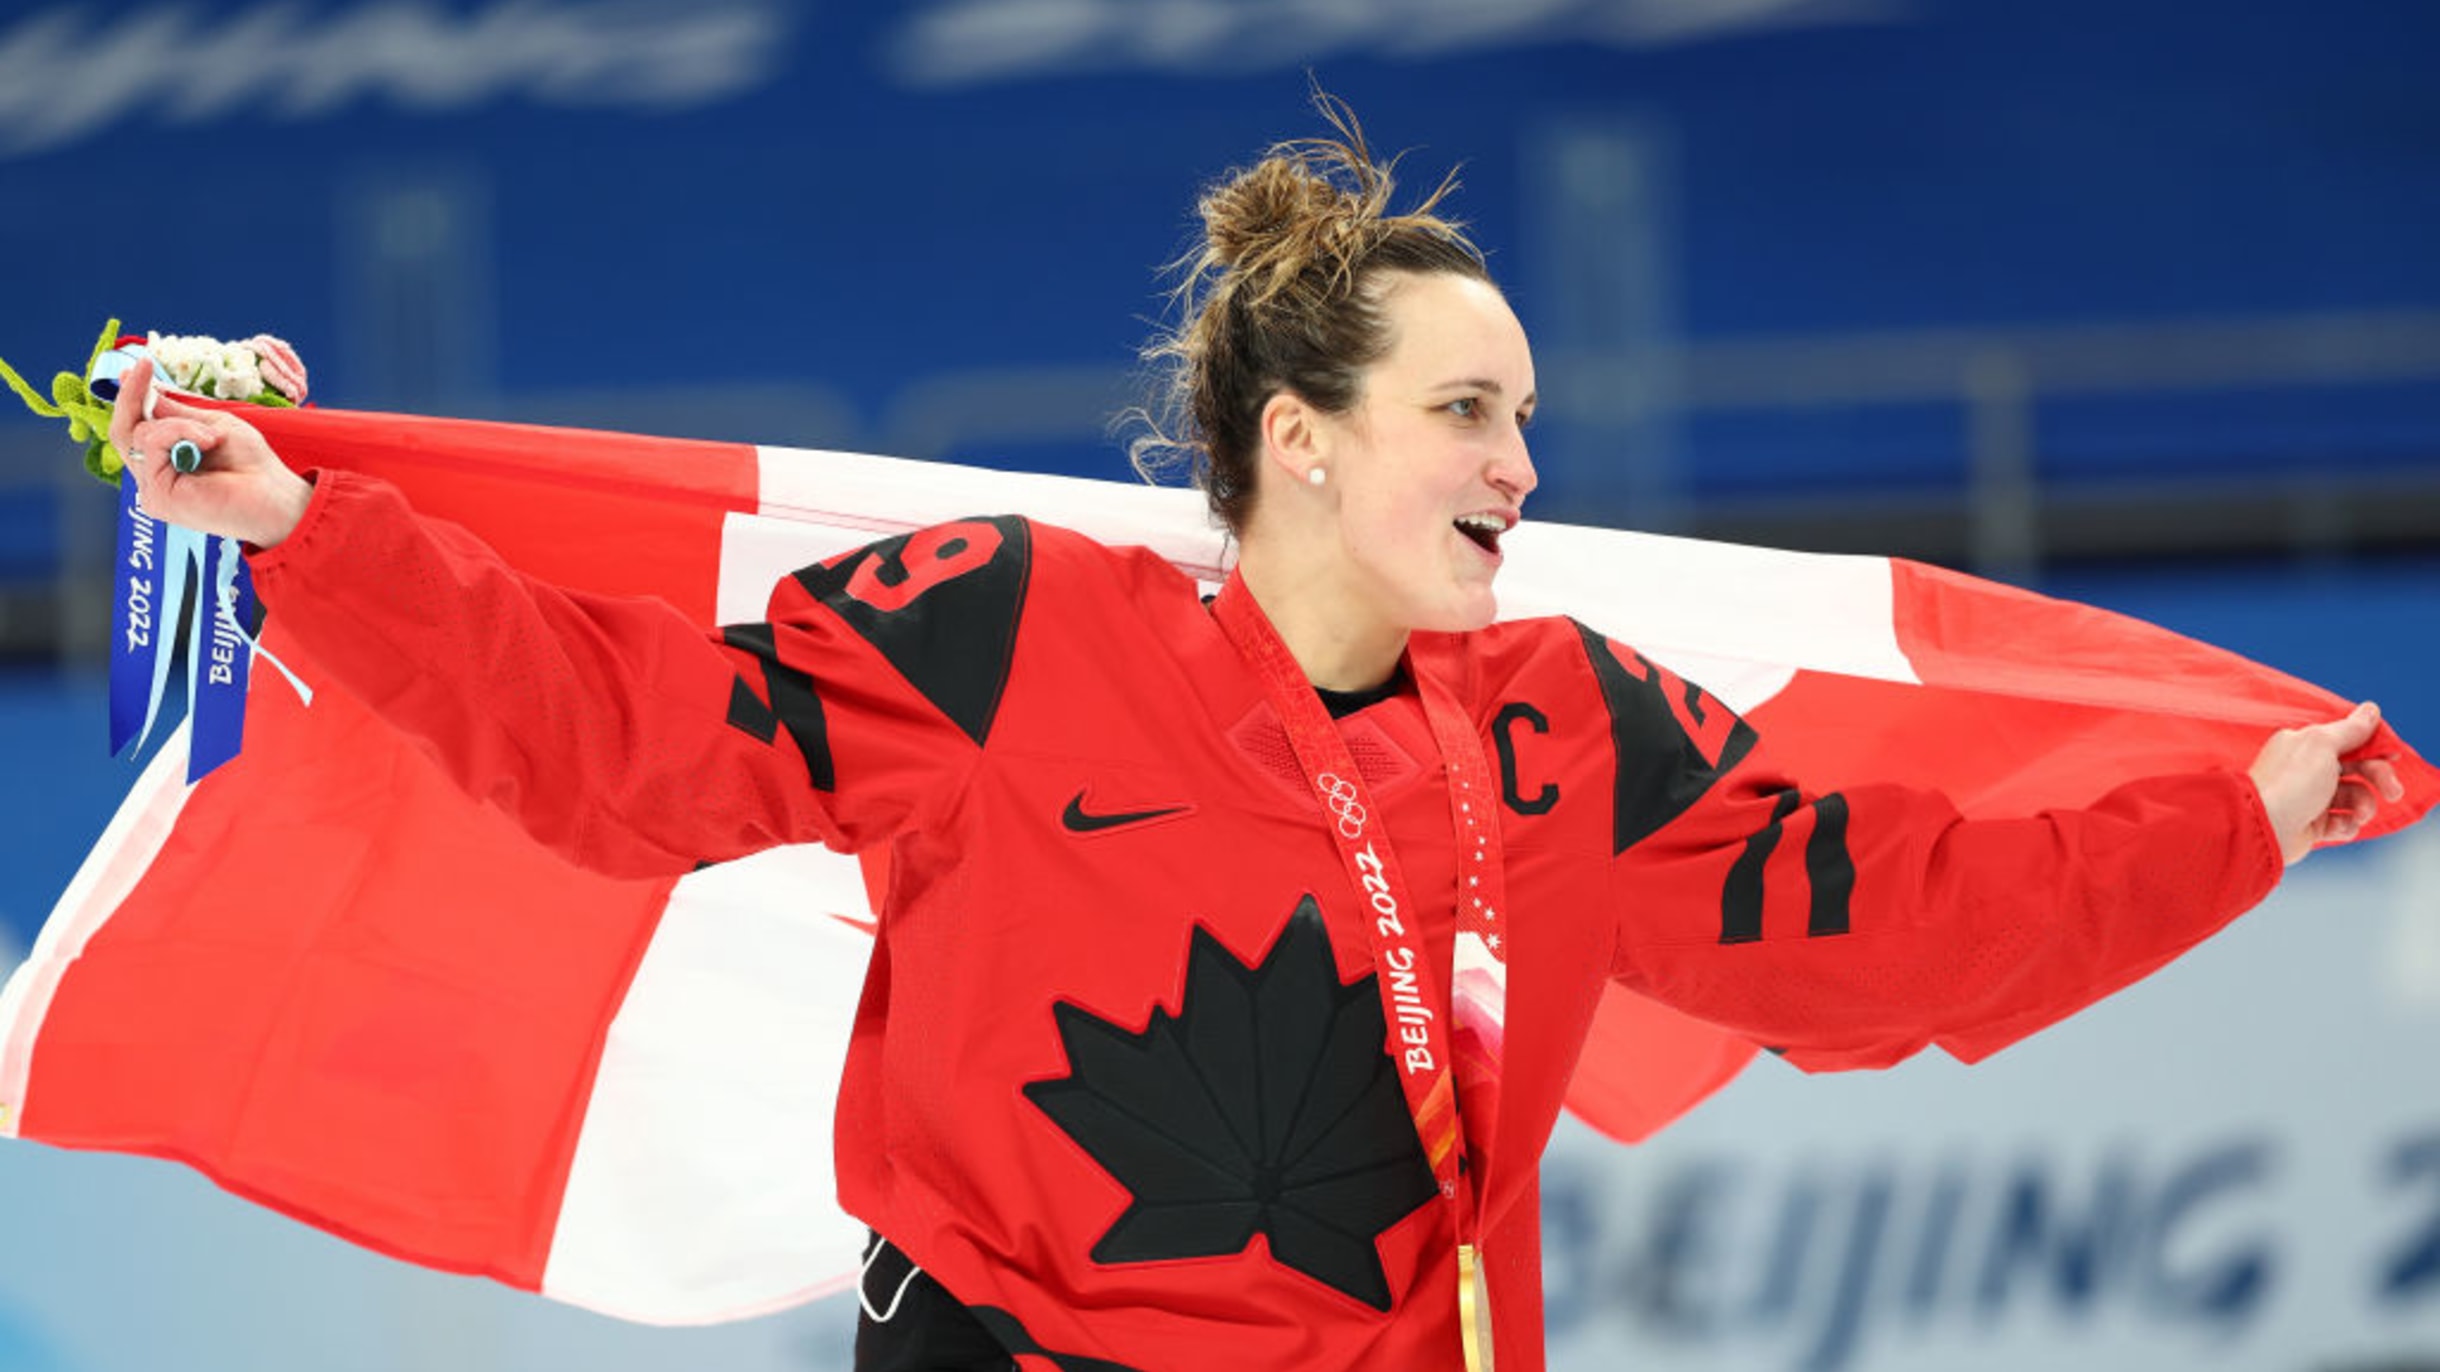 Marie-Philip Poulin on X: Don't miss the moment we go for gold